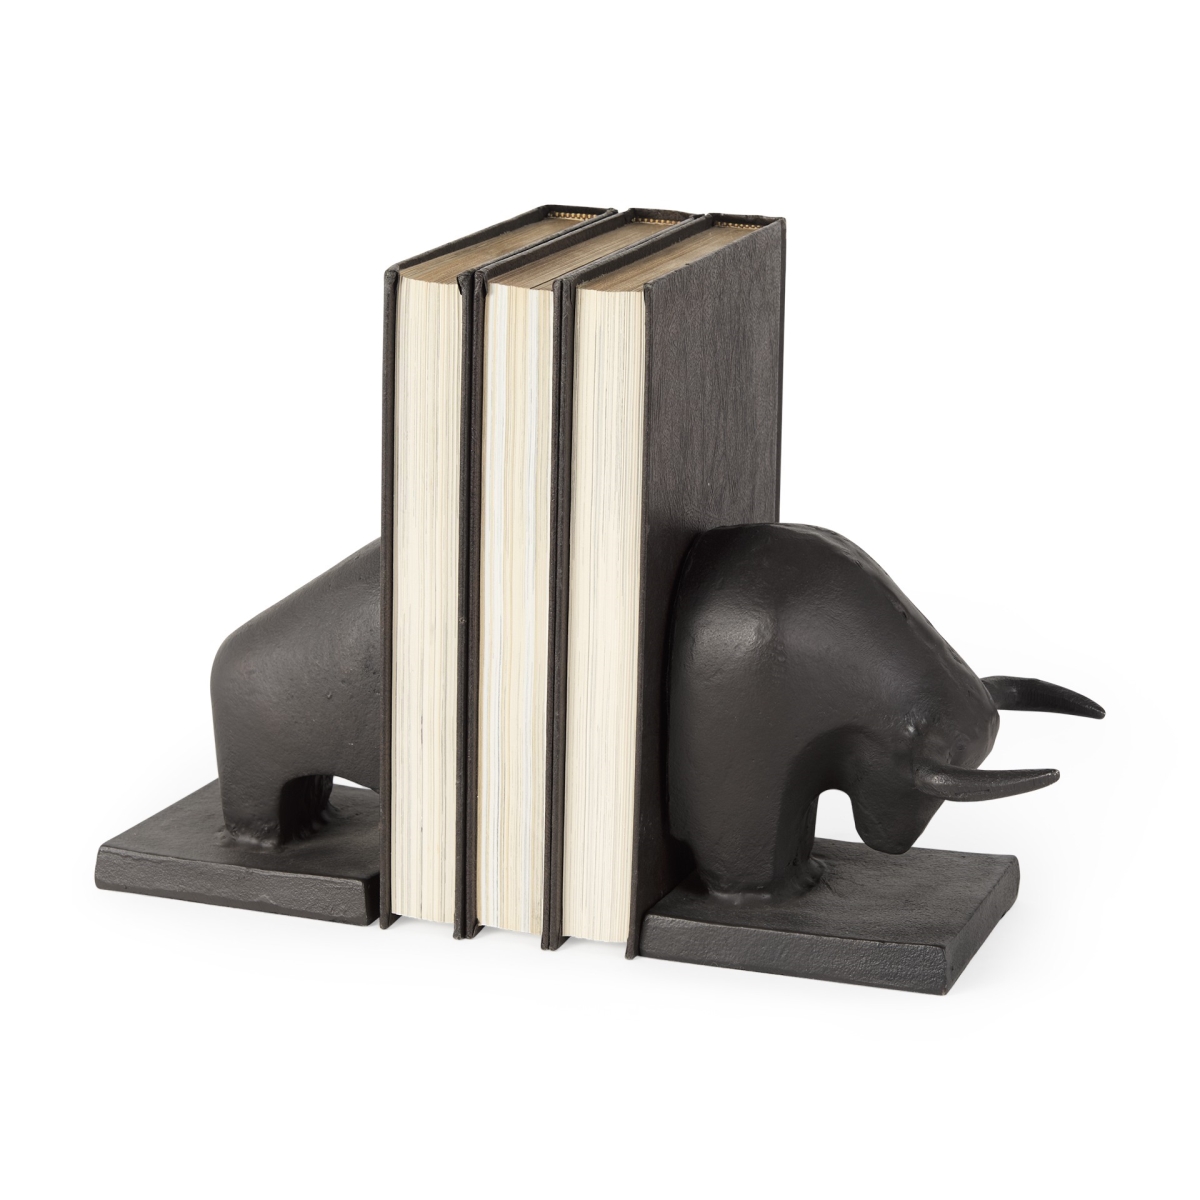 Picture of HomeRoots 392141 5.75 x 4.25 x 9.5 in. Black Cast Aluminum Raging Bull Bookends